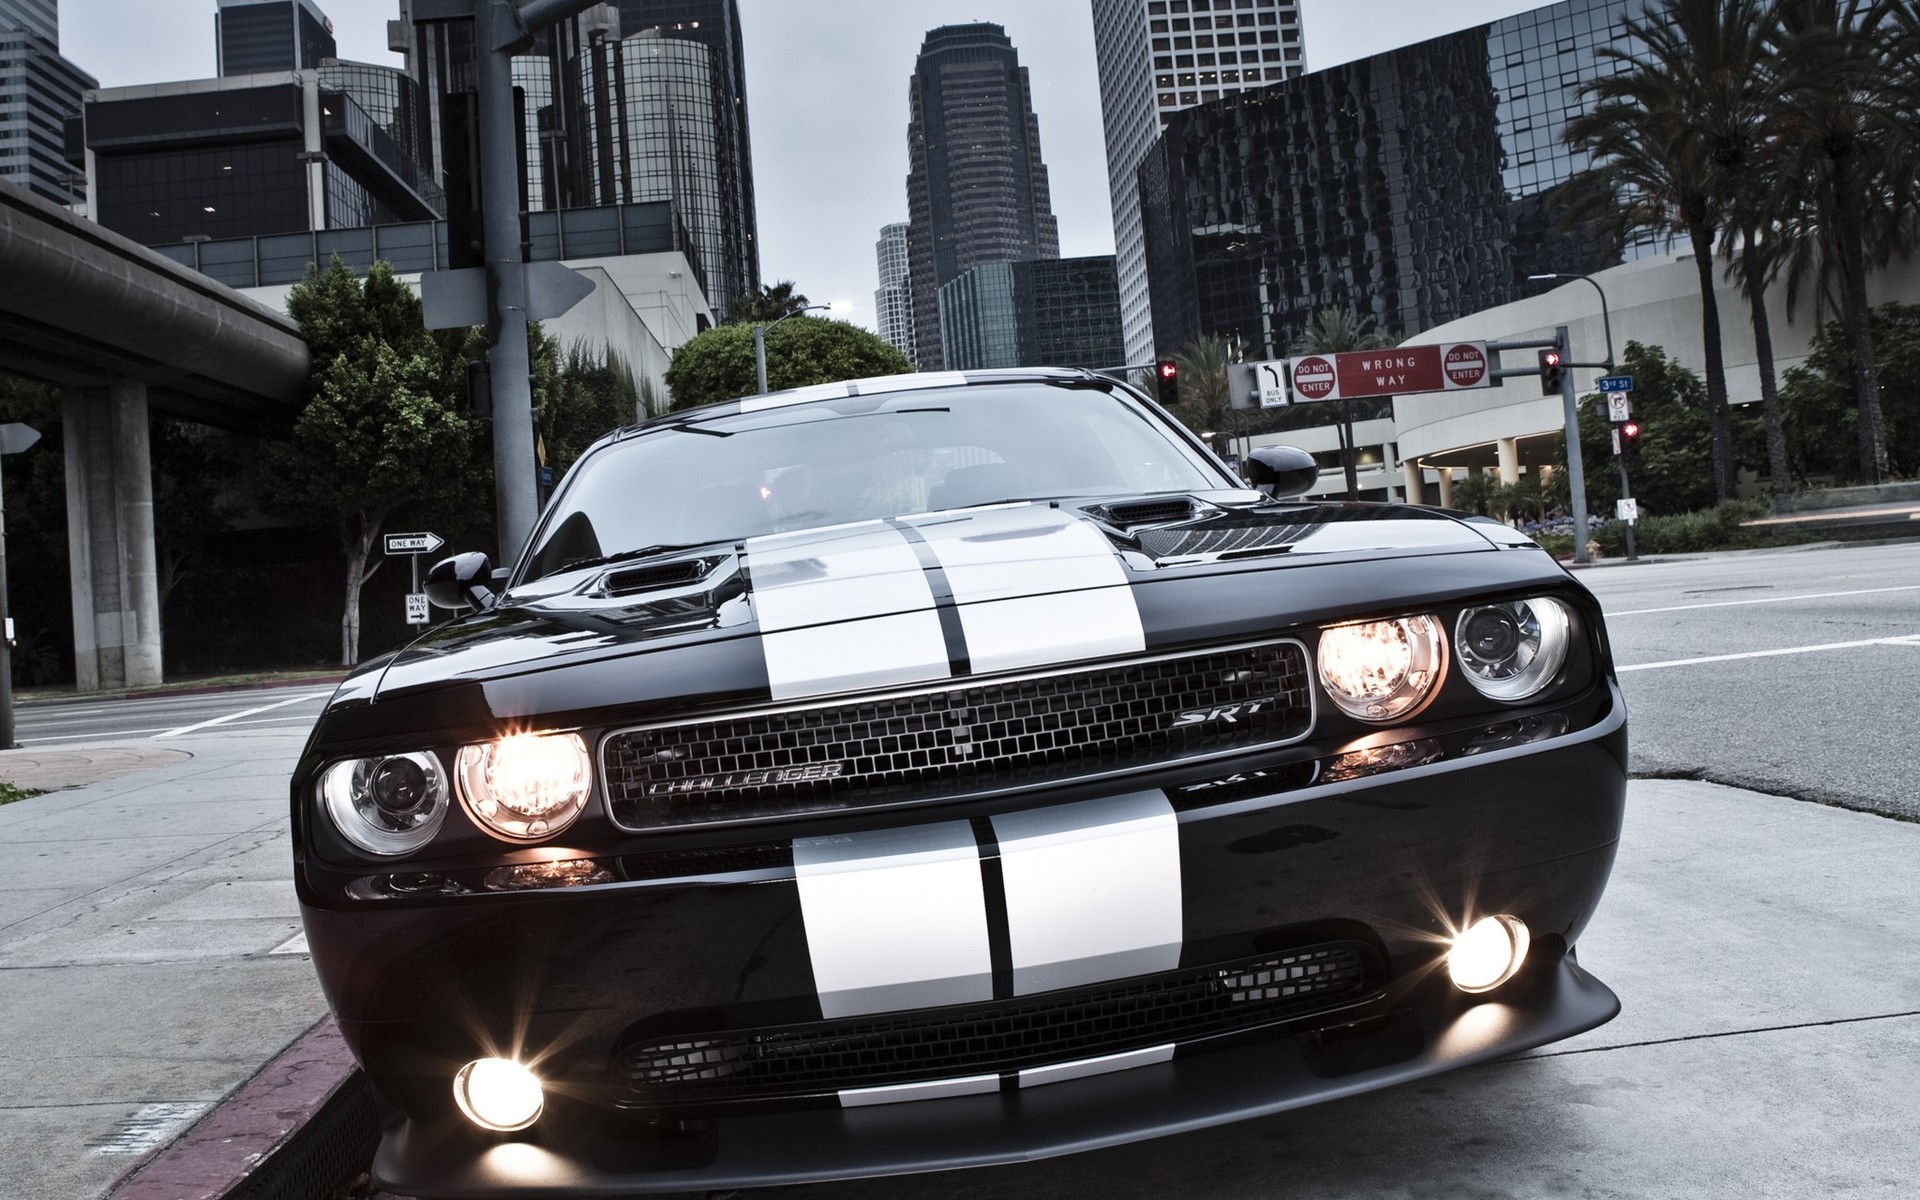 Cars Mustang 1920x1080px : Free HD Pic